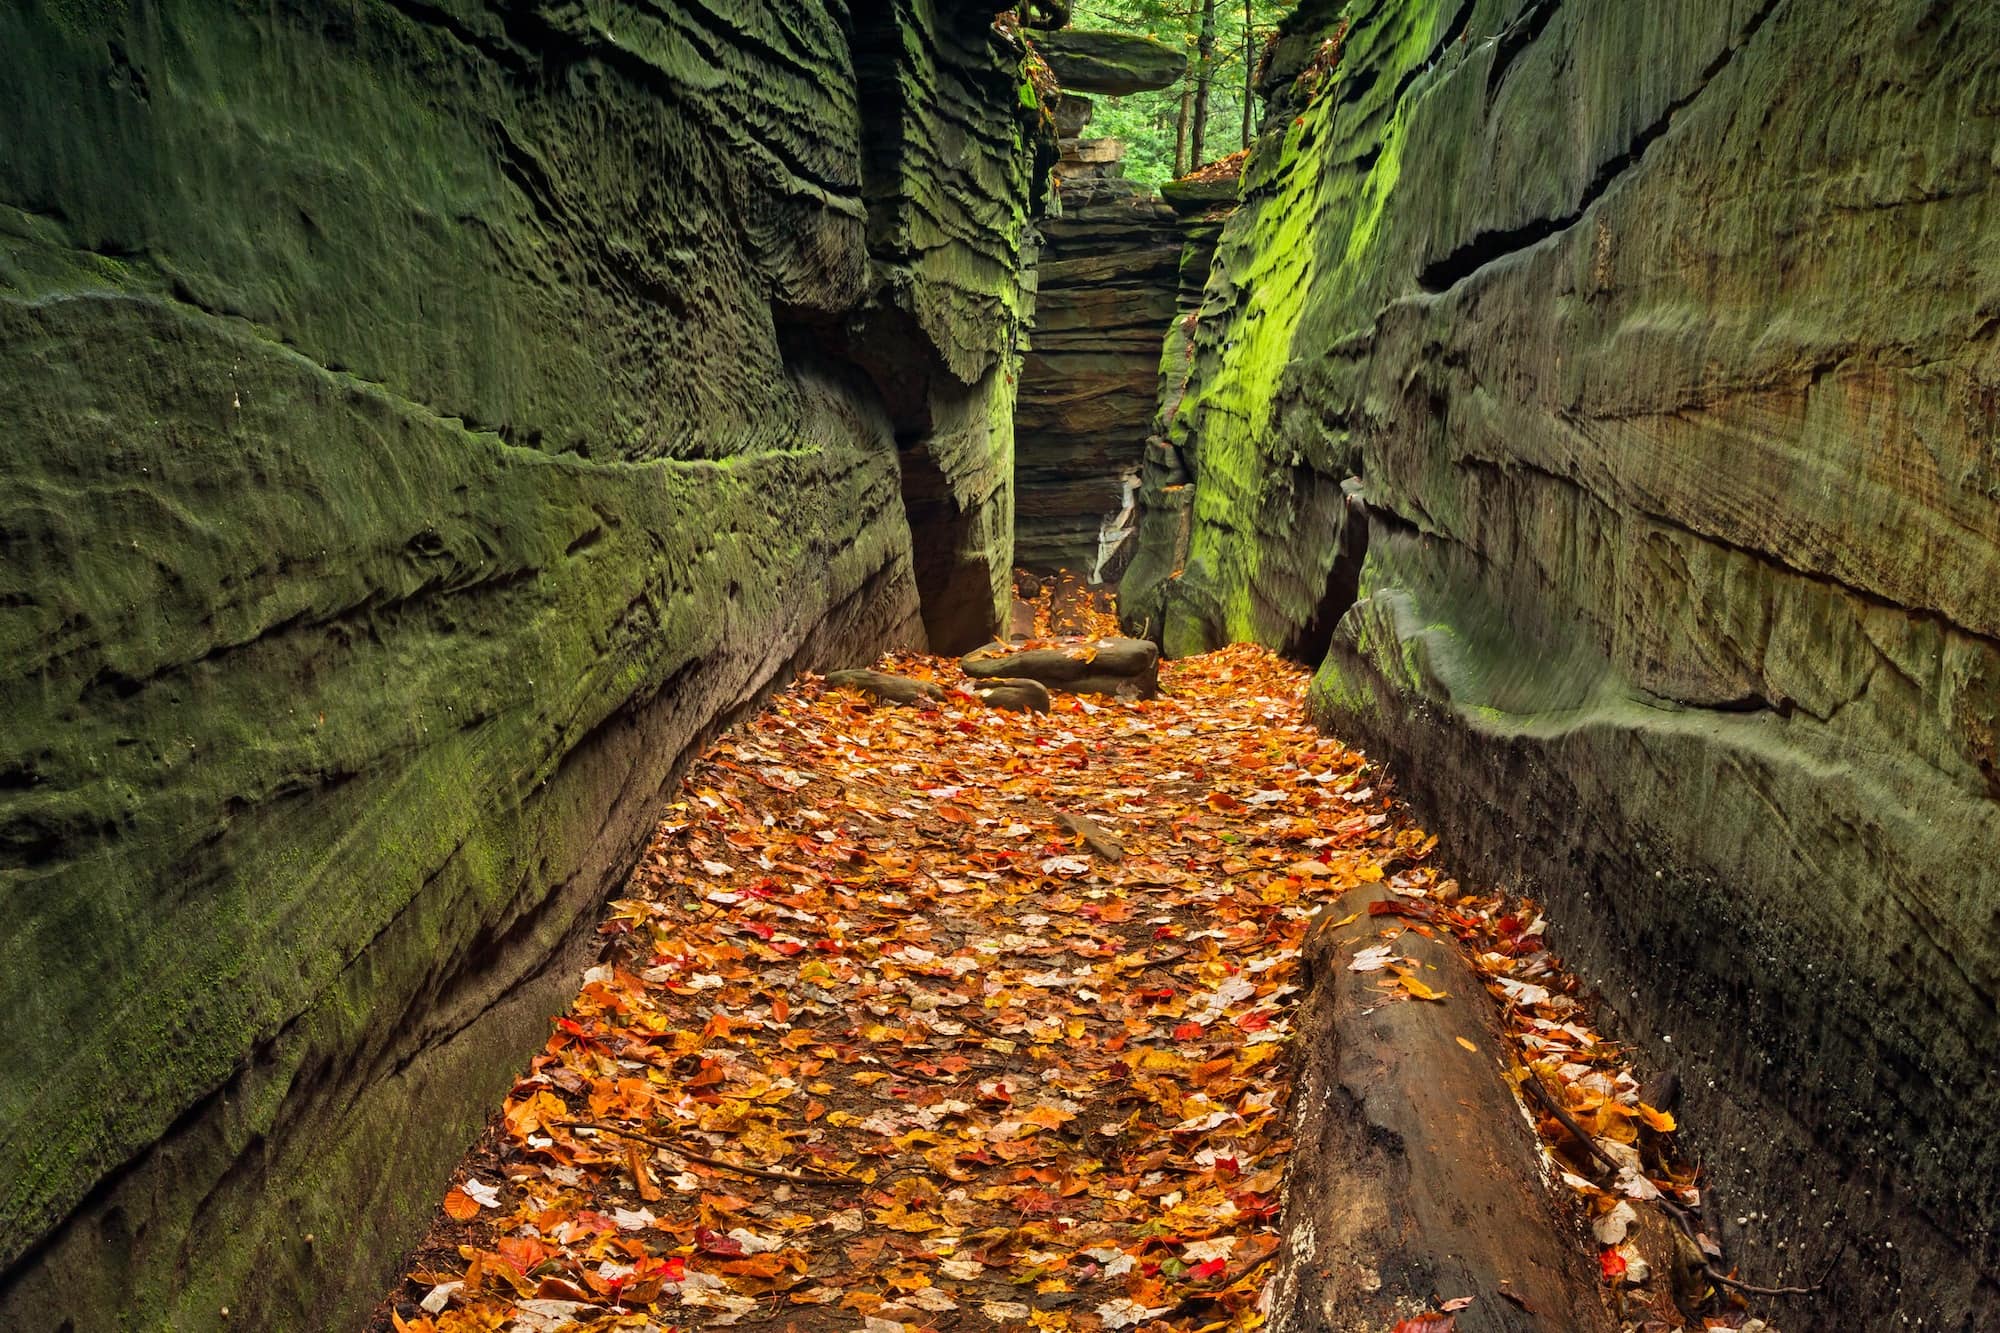 Cuyahoga Valley National Park // Check out the best National Parks to visit in the fall for the a leaf-peeping vacation. Enjoy autumn colors in these 10 great parks.